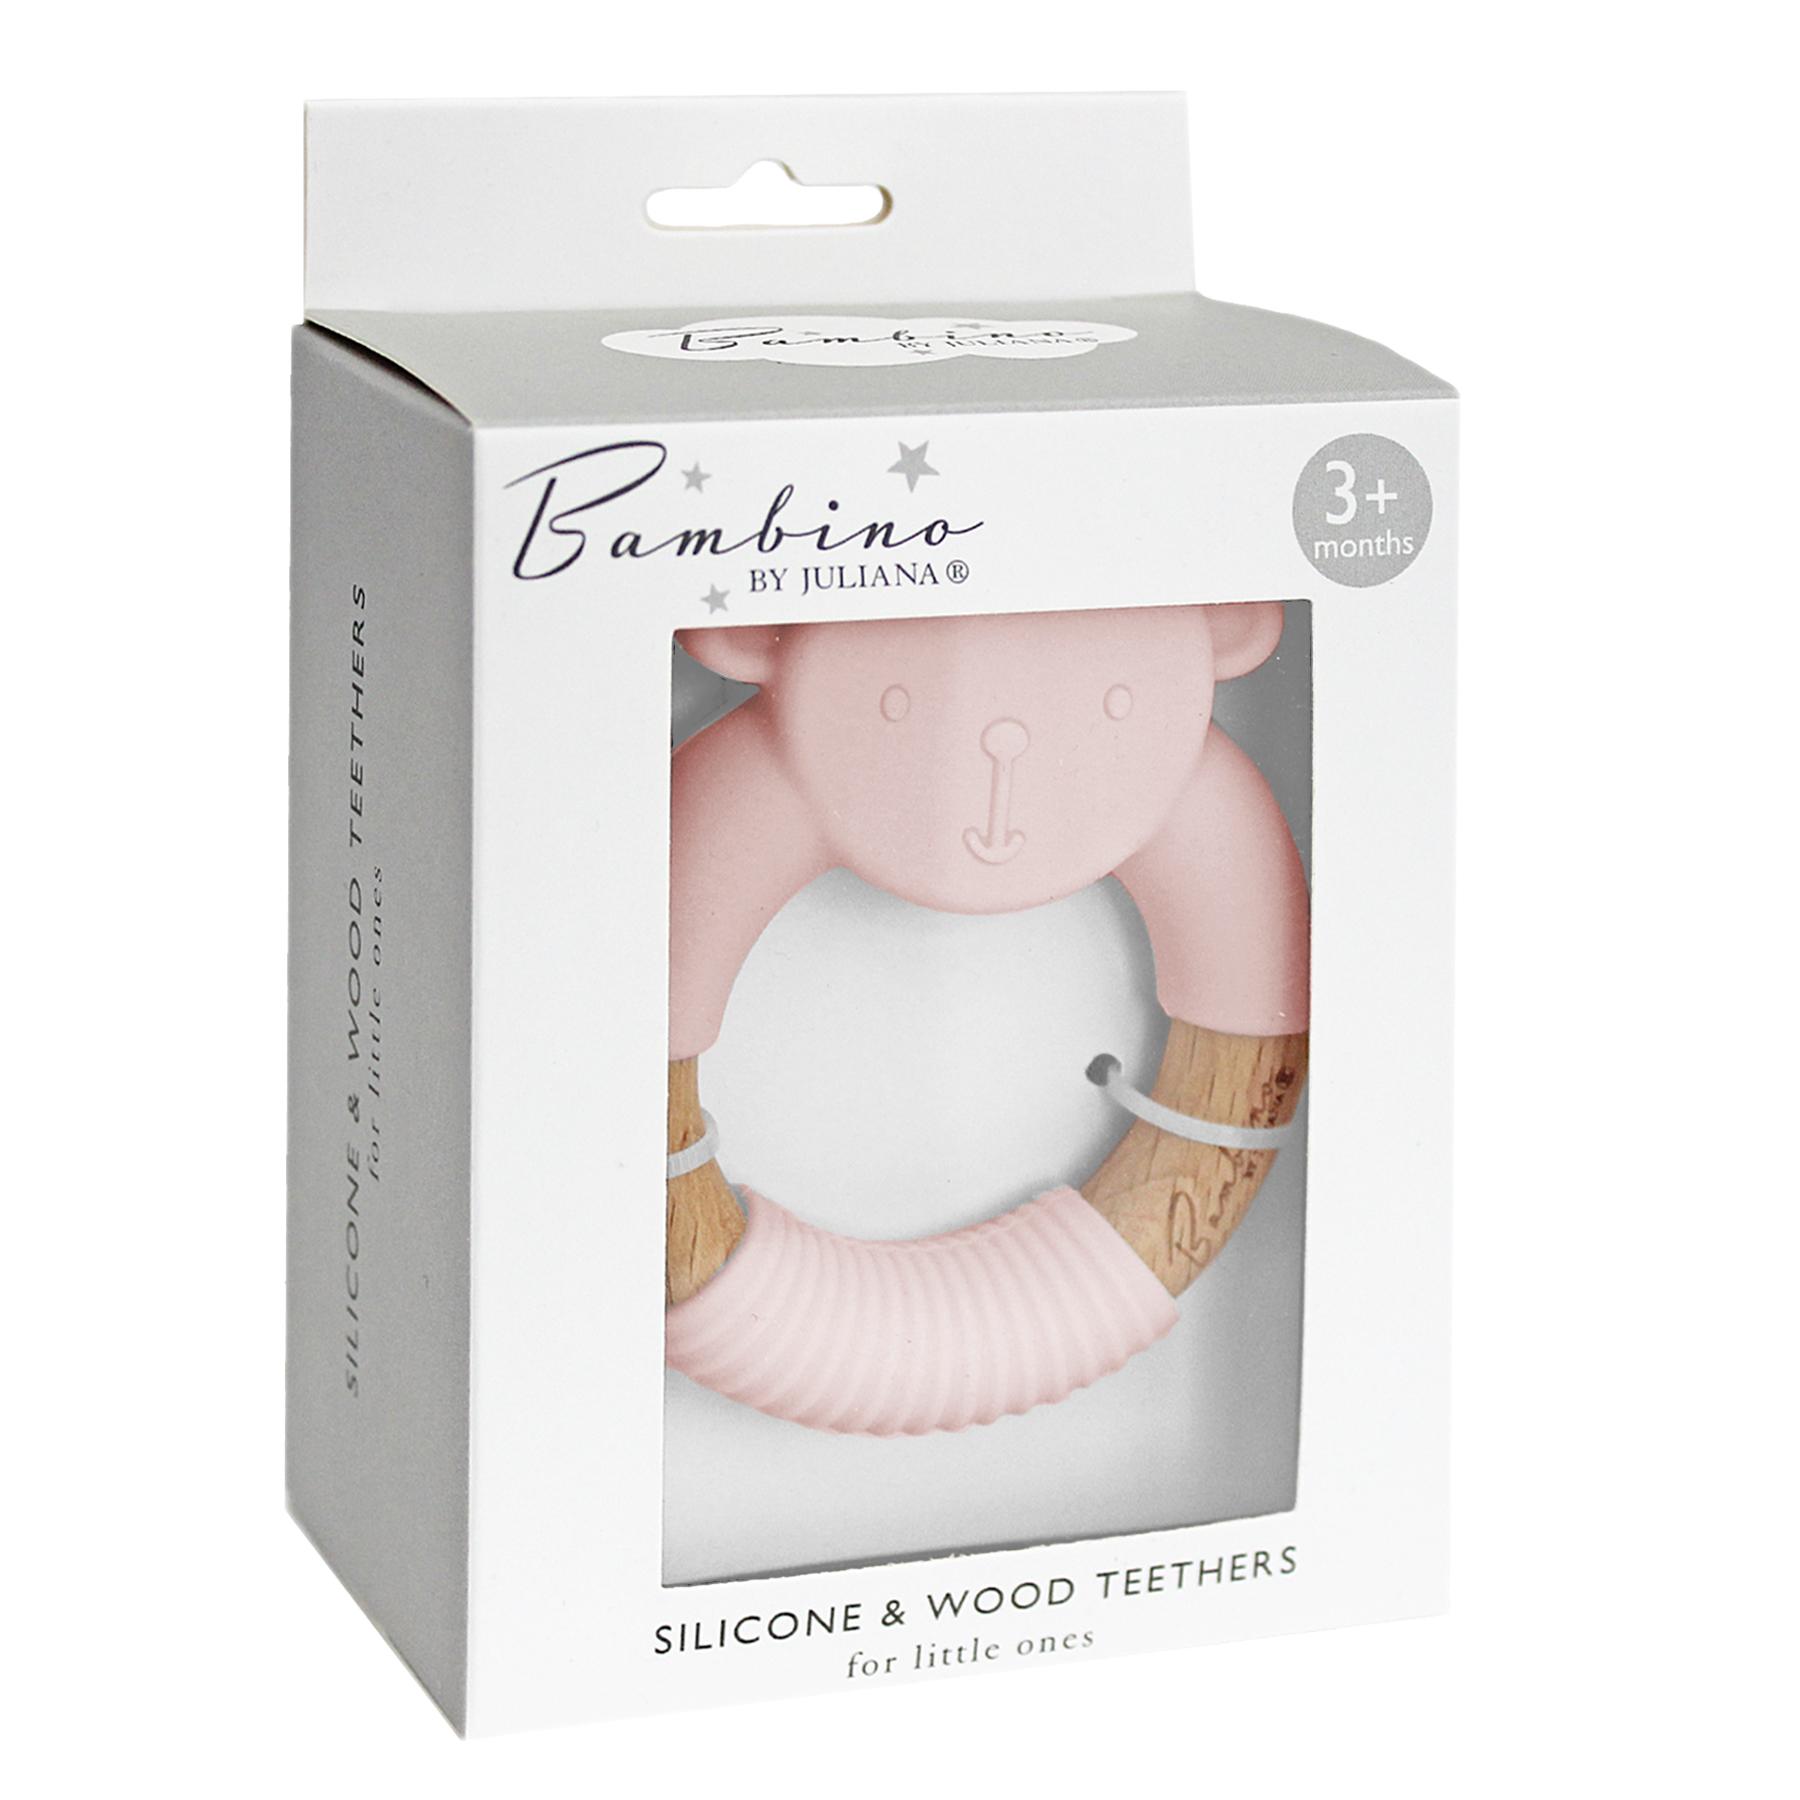 Bambino by Juliana® Round Pink Silicone Teddy & Wood Teether Boxed